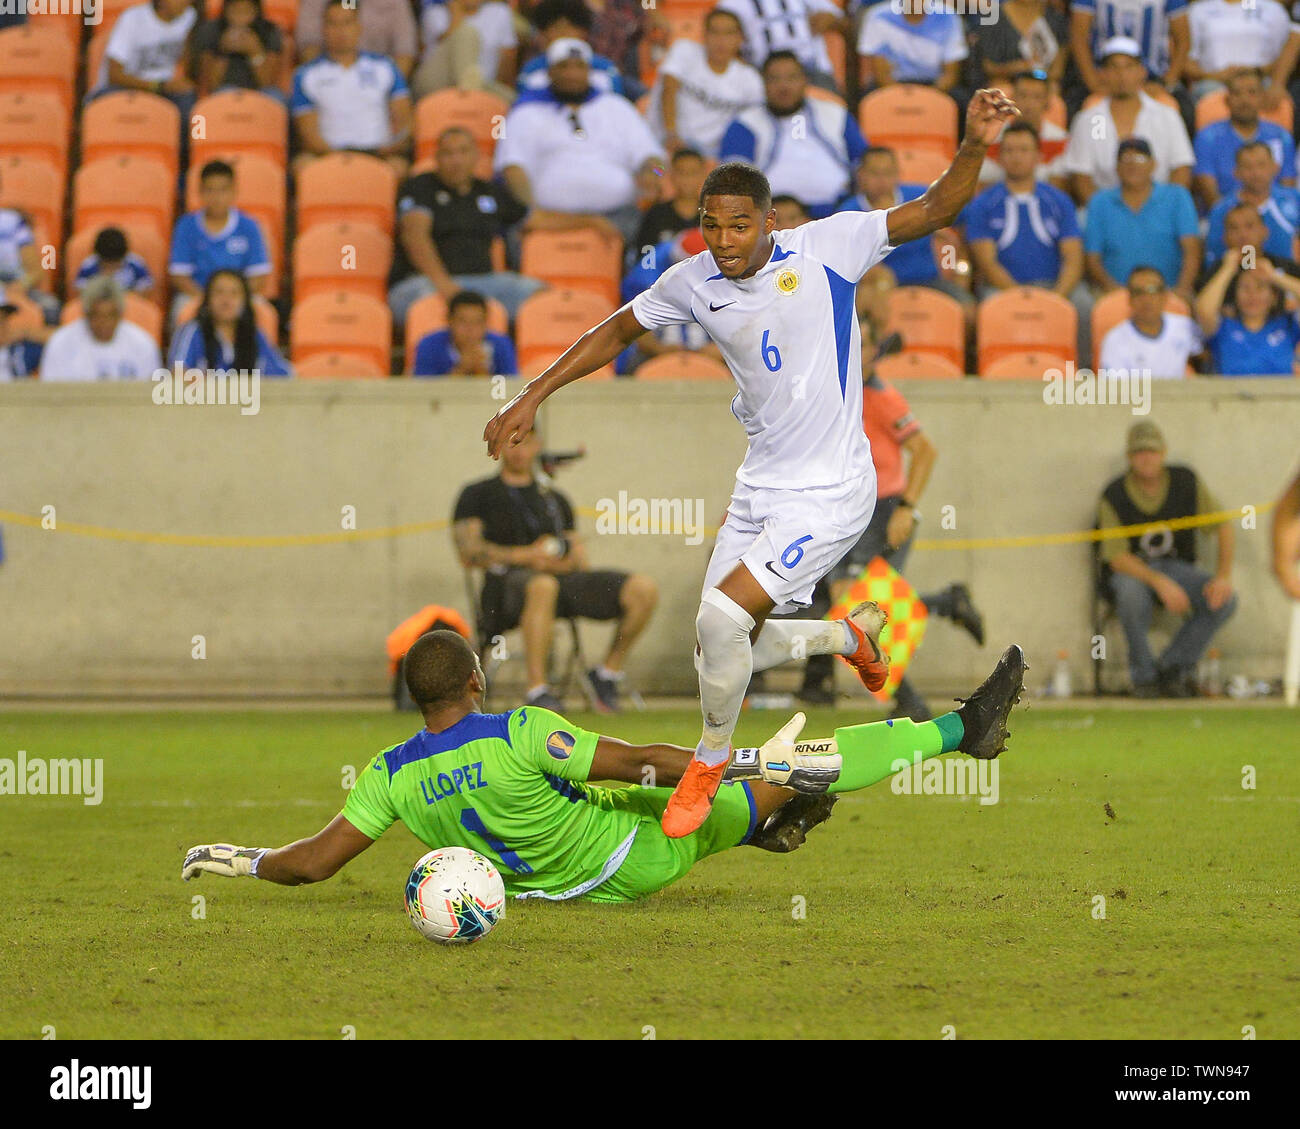 Houston, TX, USA. 21st June, 2019. Honduras goalkeeper, Luis Lopez (1), dives for the ball as Curacao midfielder, Michael Maria (6), moves in to the goal box during 2019 CONCACAF Gold Cup match between Honduras and Curacao, at BBVA Compass Stadium in Houston, TX. Mandatory Credit: Kevin Langley/Sports South Media/CSM/Alamy Live News Stock Photo